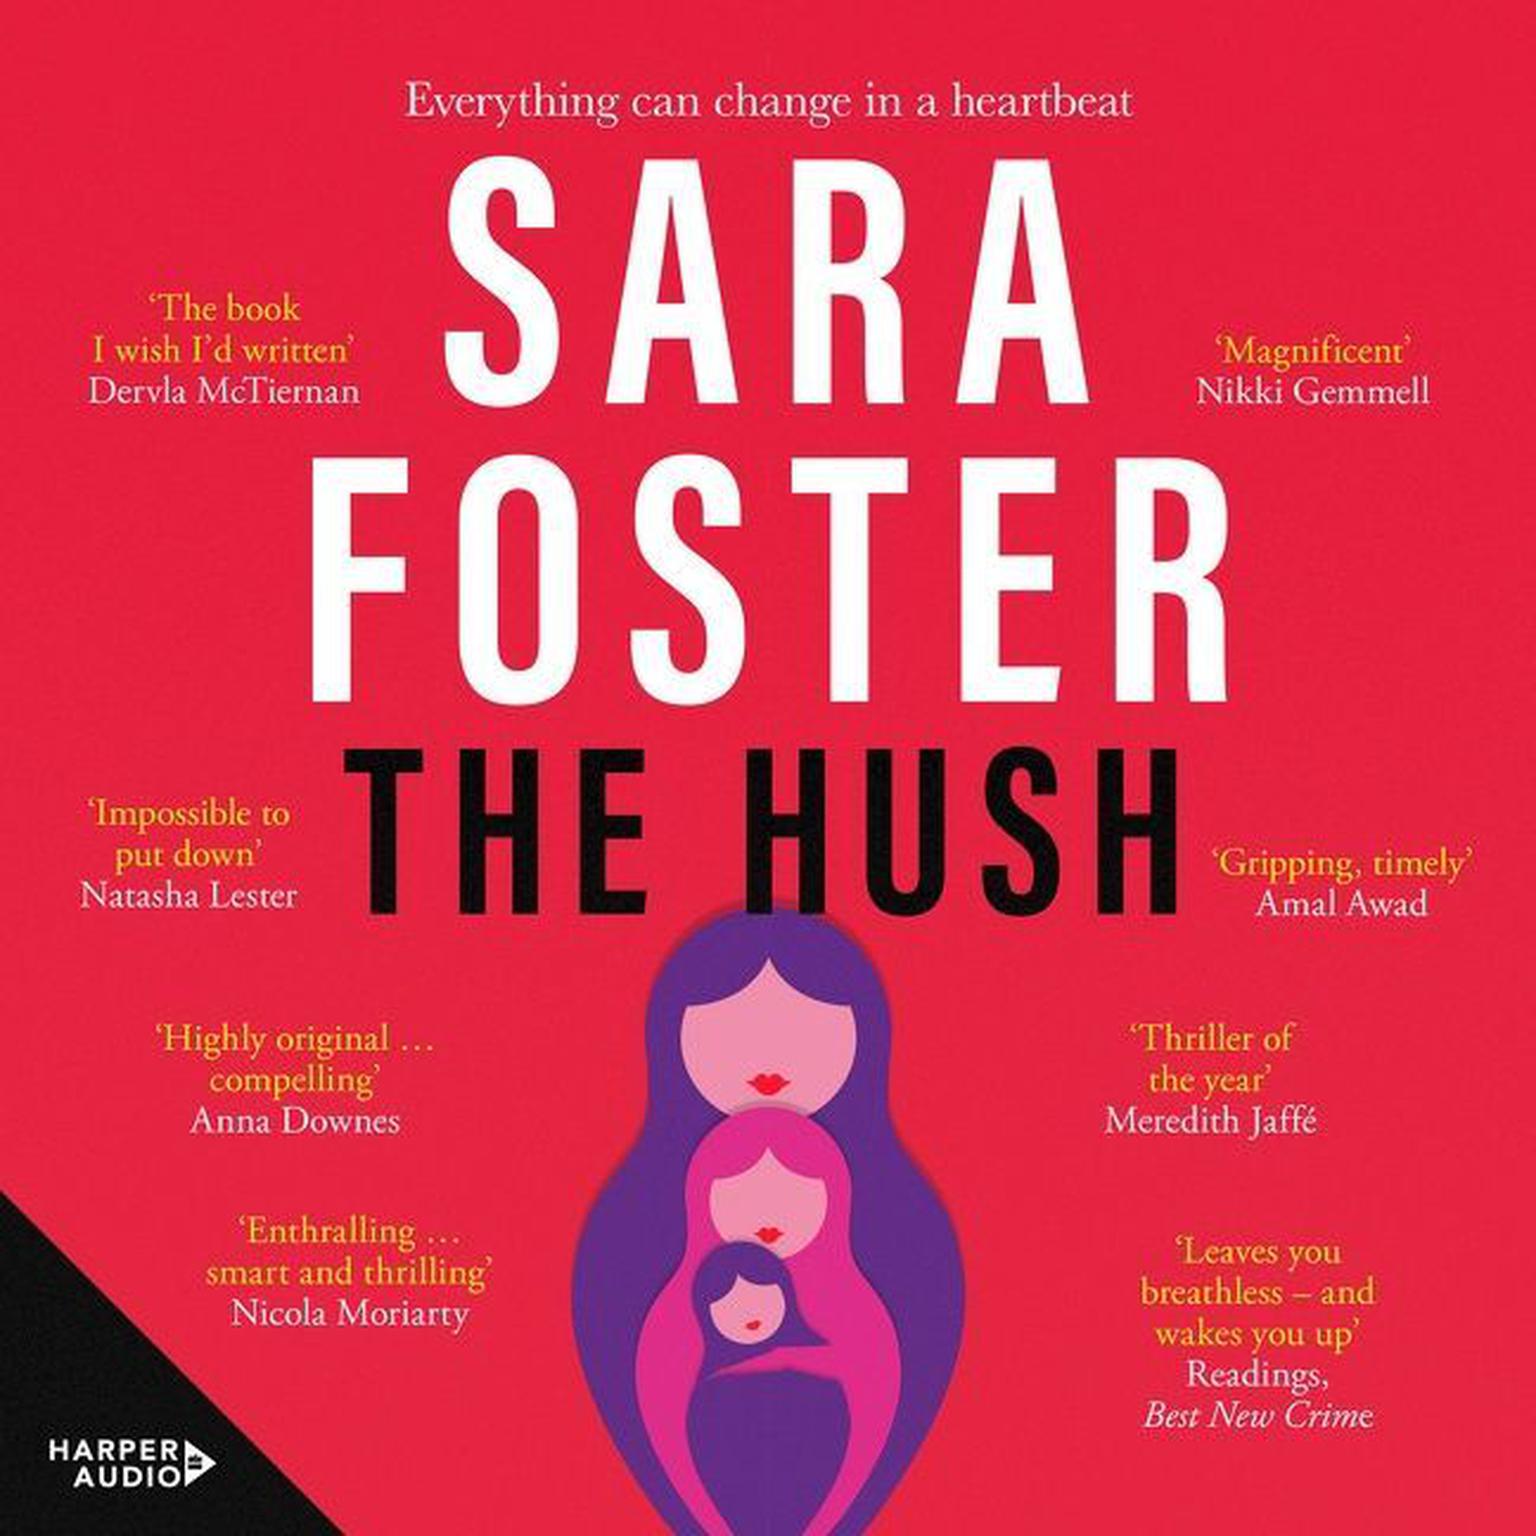 The Hush Audiobook, by Sara Foster